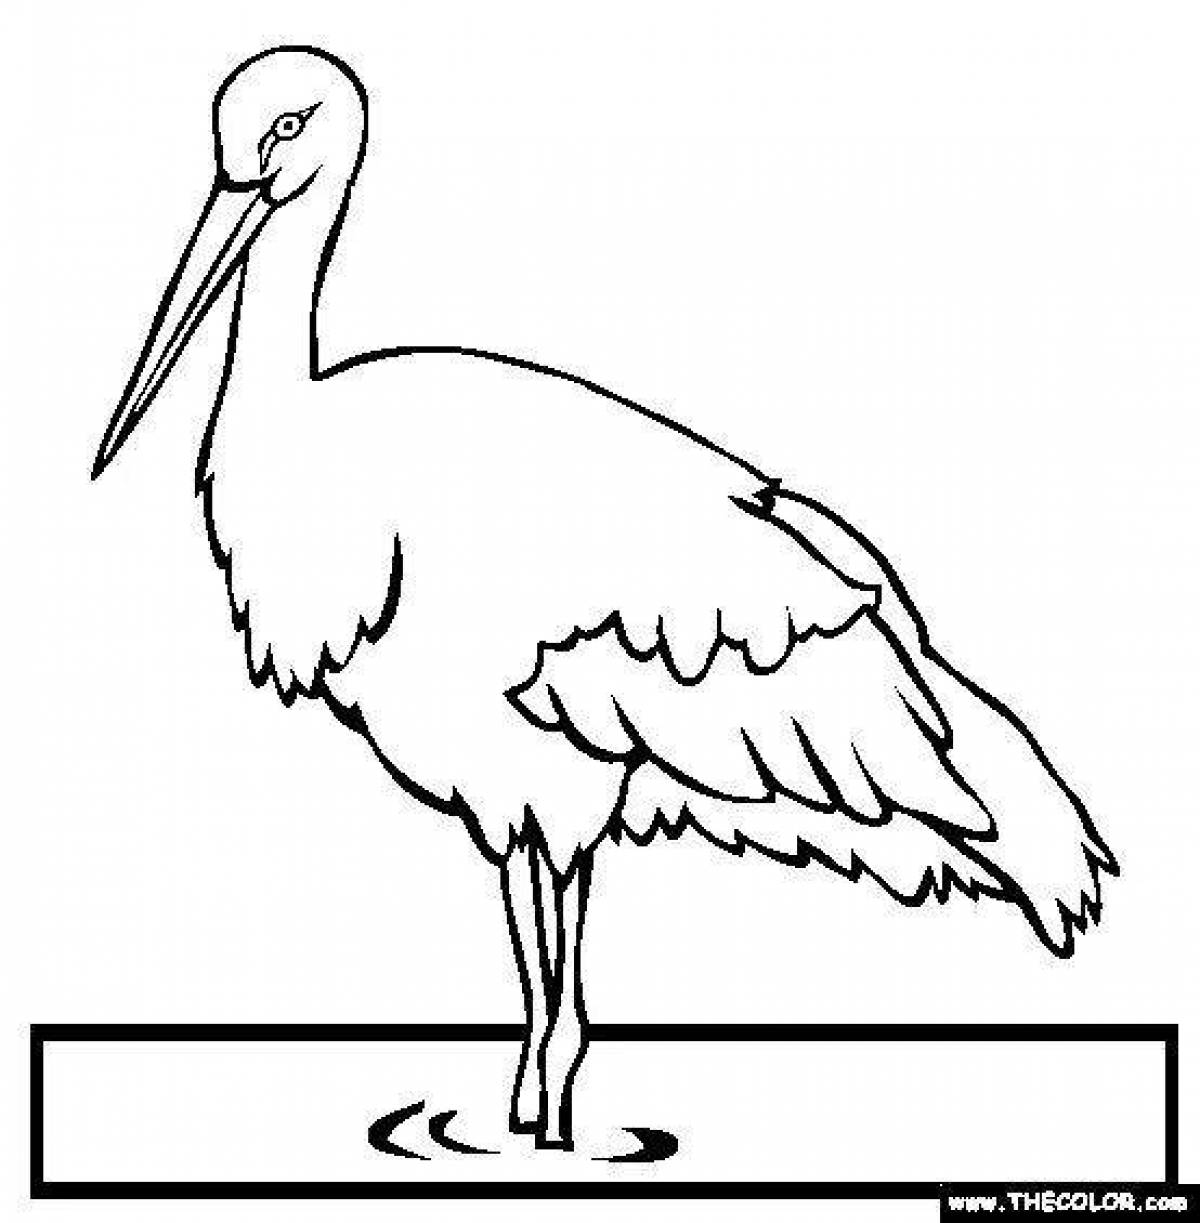 Brightly colored black stork coloring book